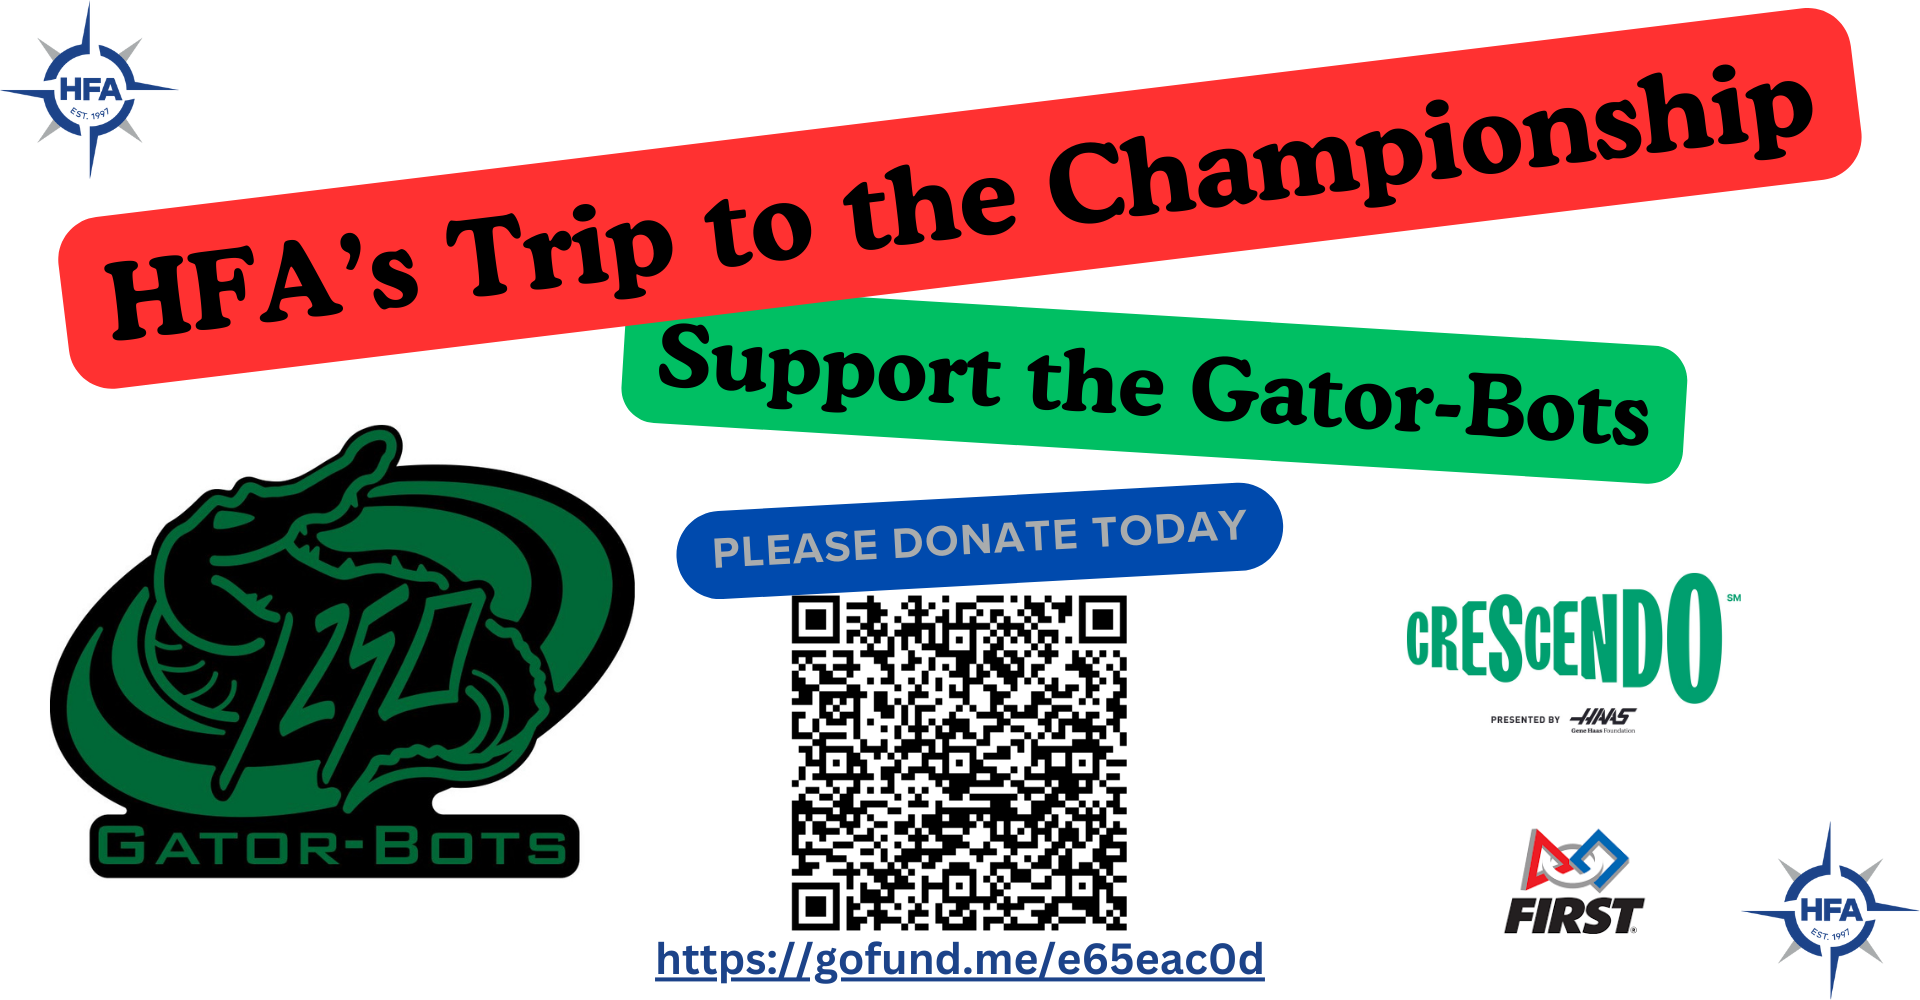 HFA's Gator-Bots are headed to the Championship. Please Help - donate to https://gofund.me/e65eac0d